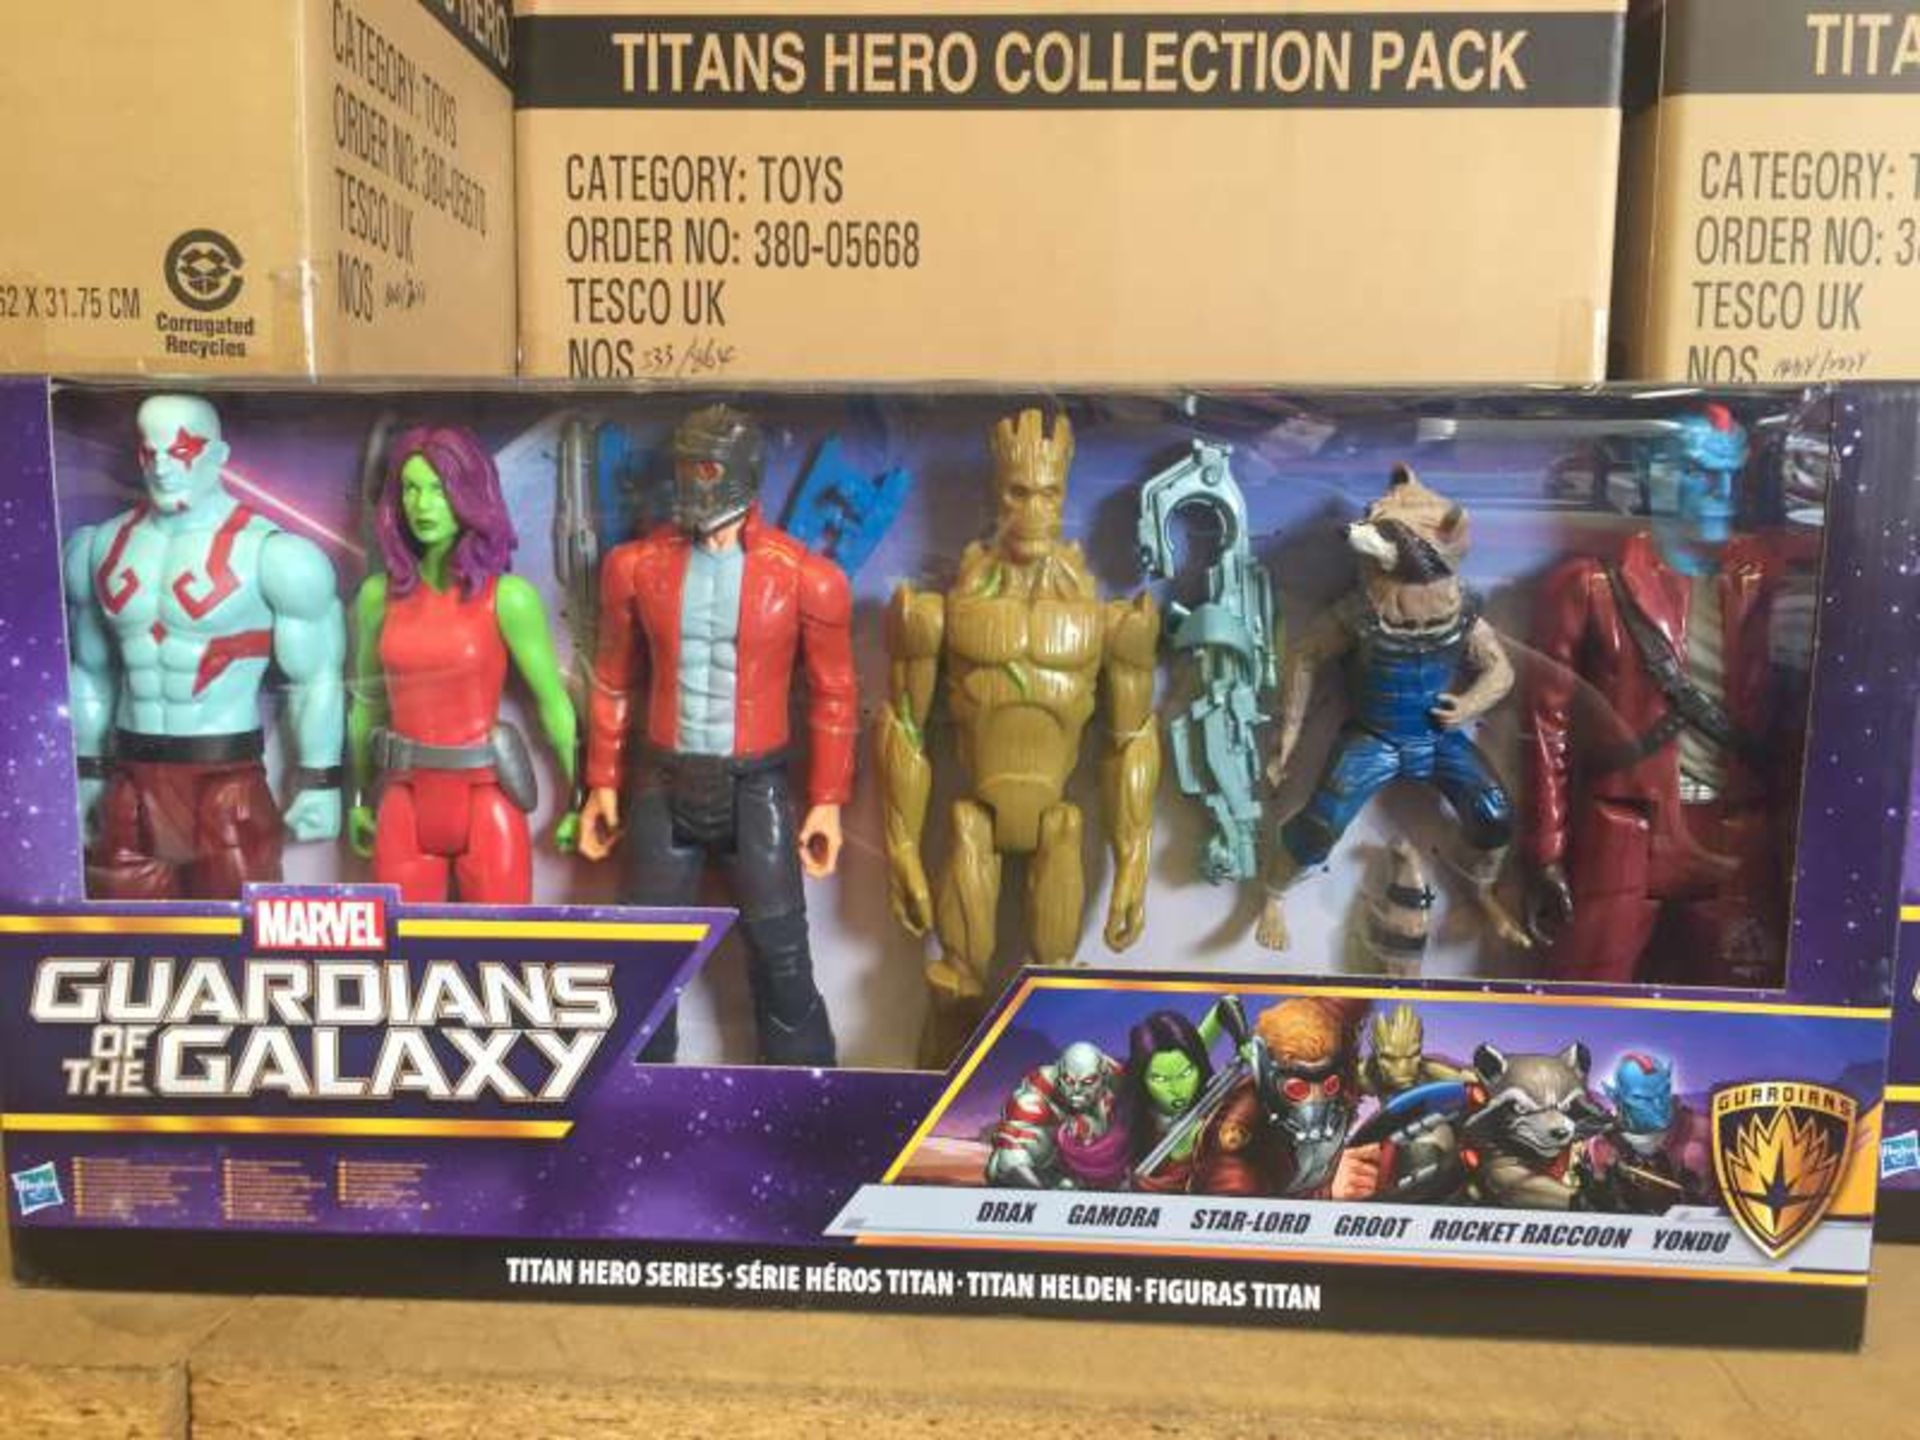 8 X BRAND NEW BOXED 6 PIECE MARVEL GUARDIANS OF THE GALAXY FIGURE SETS IN 2 BOXES